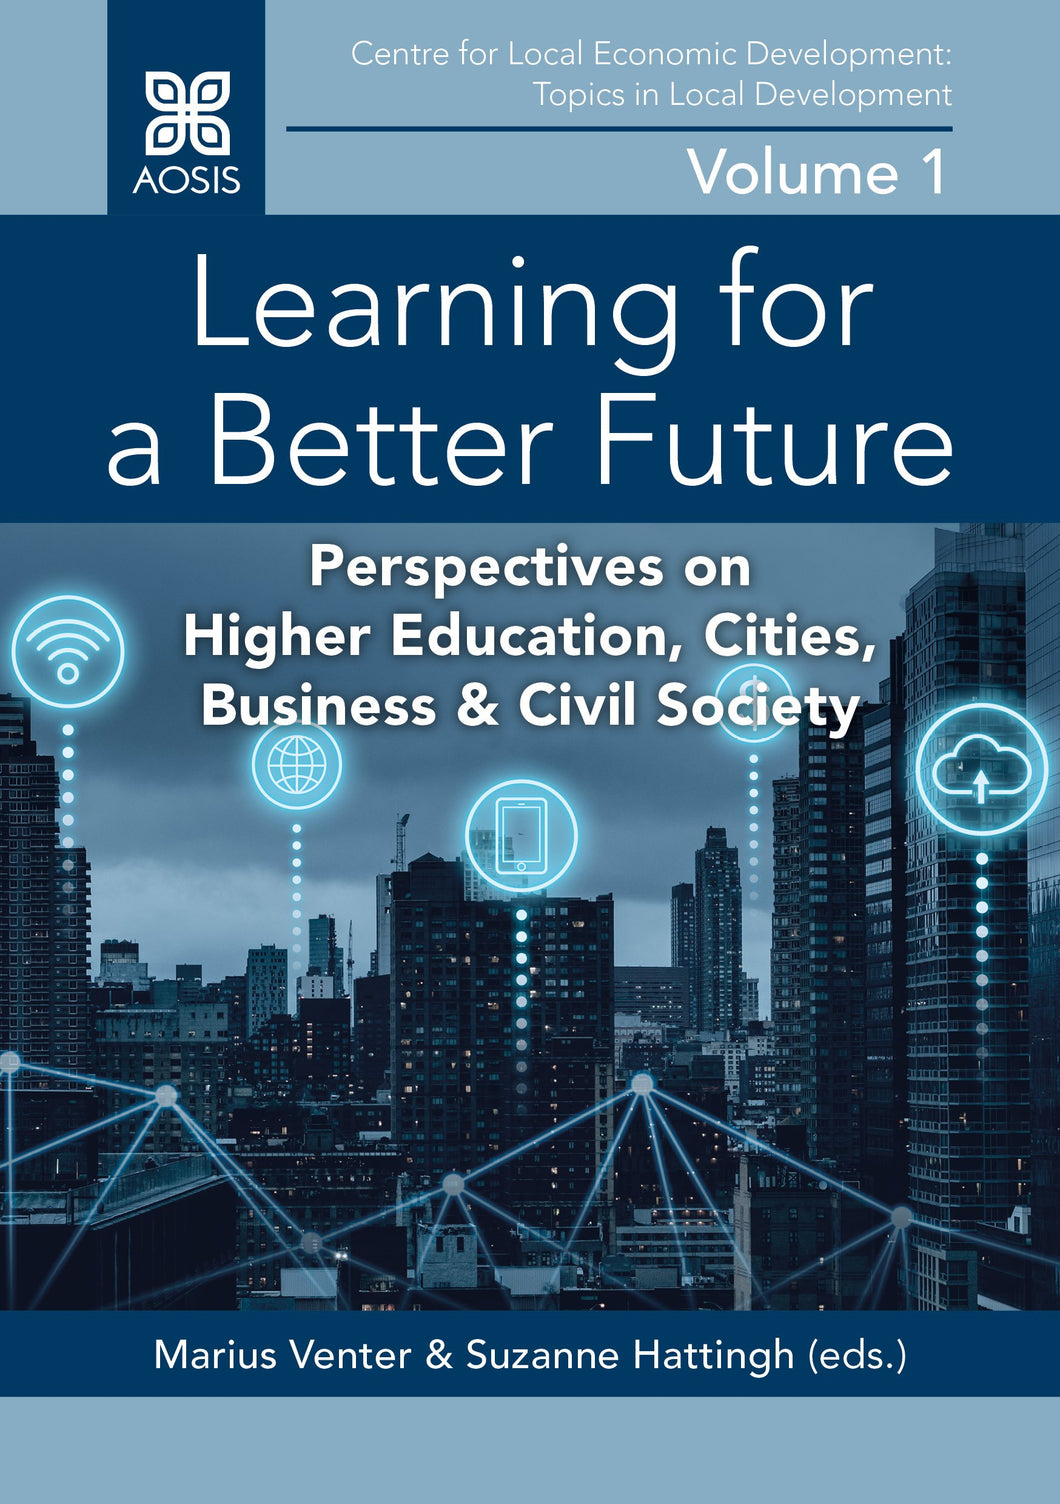 Learning for a Better Future: Perspectives on Higher Education, Cities, Business & Civil Society (ePub Digital Downloads)